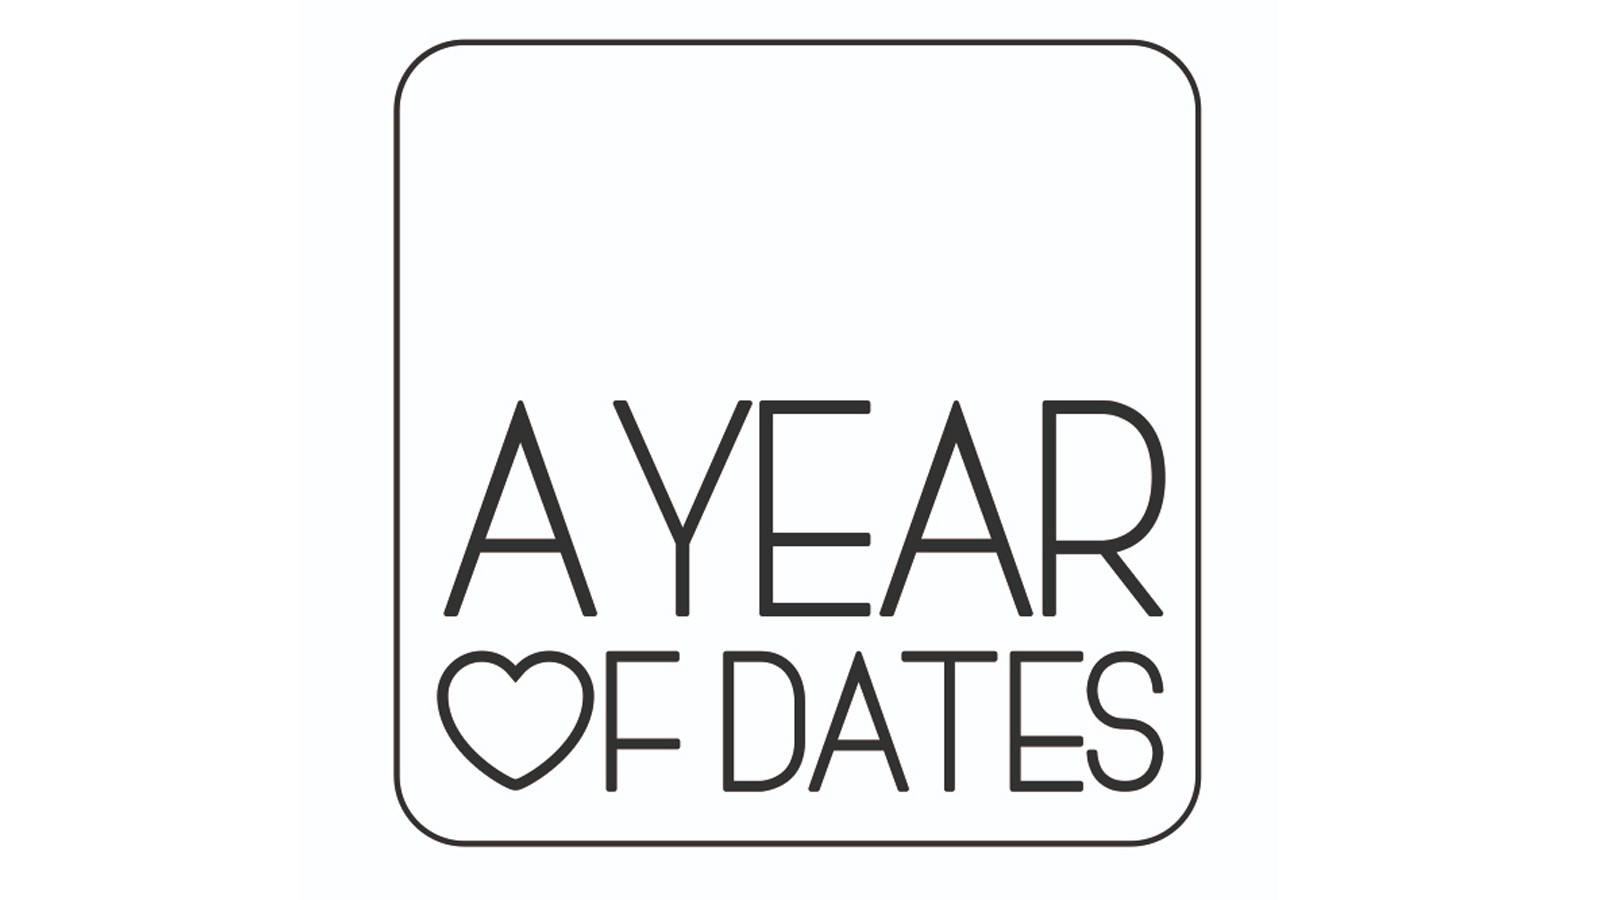 Year of dates